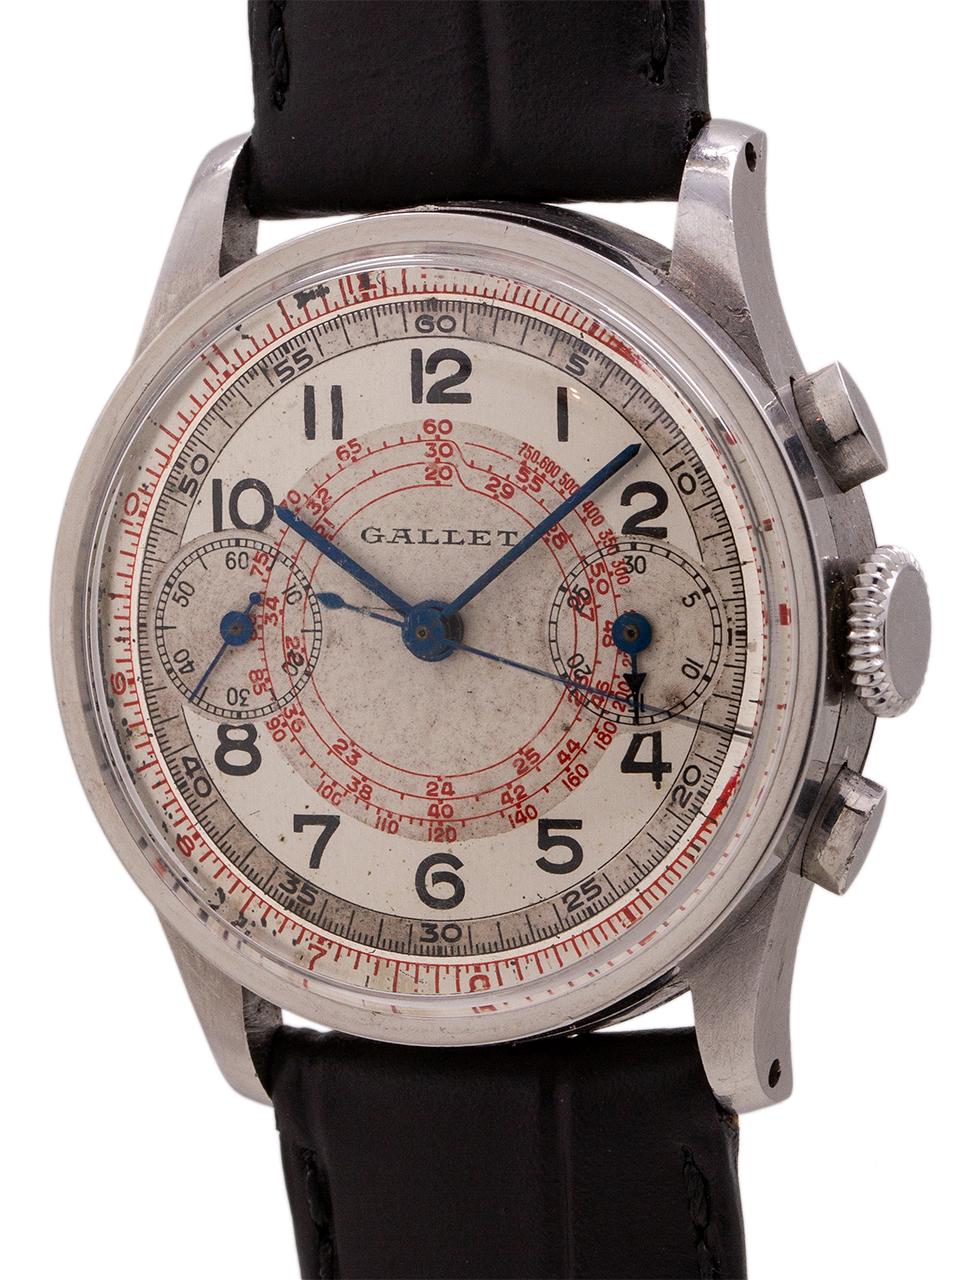 
Very desirable example medium size 1940’s Gallet chronograph with telemeter scale. The 32mm size may make most men pause, but it is a wonderful throw back to a time when watches were small and simply functional. The stainless steel case has short